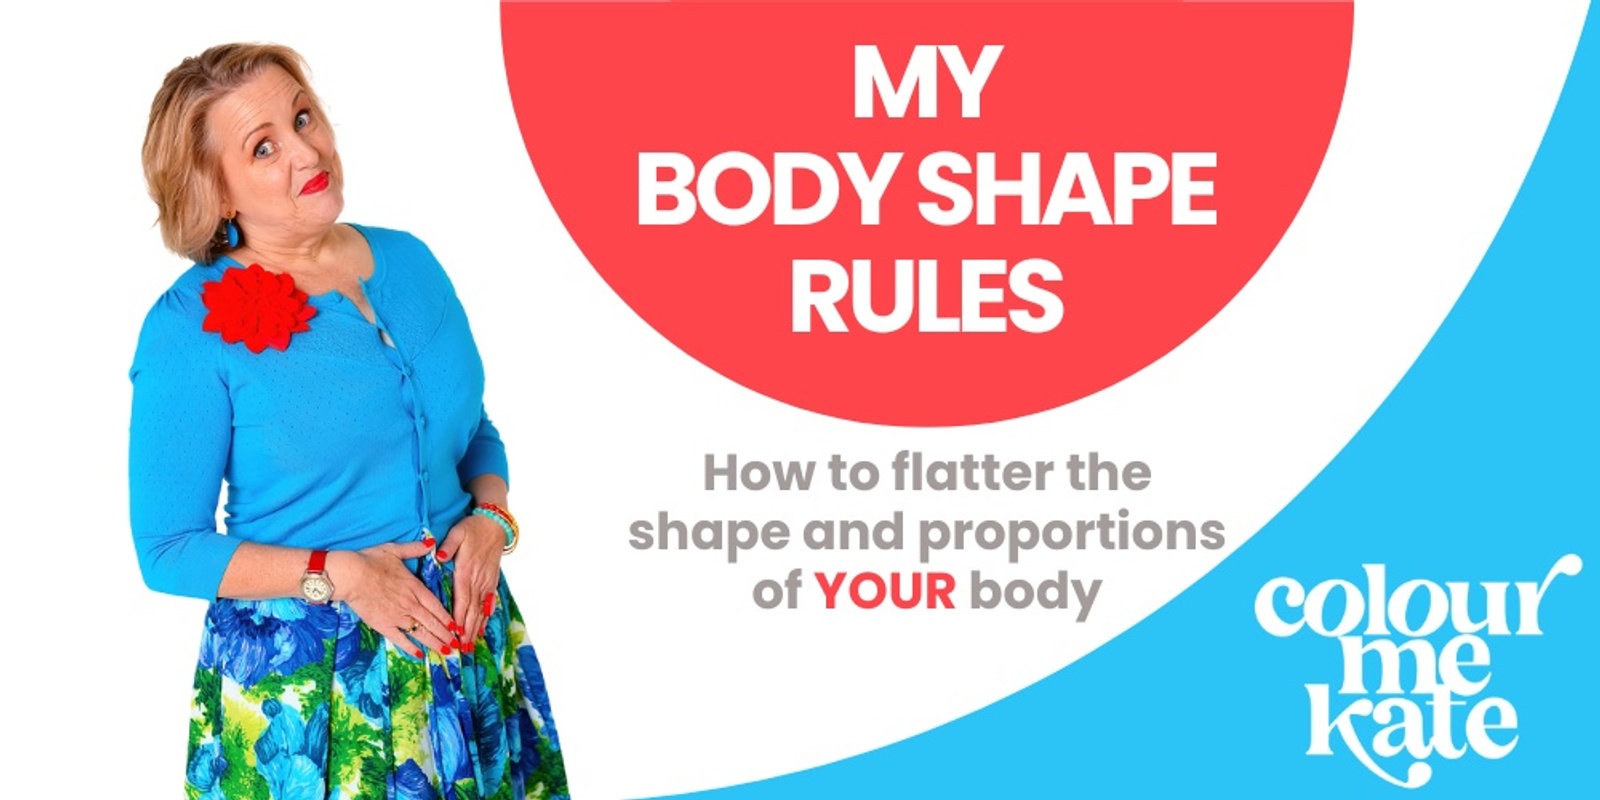 Banner image for MY BODY SHAPE RULES